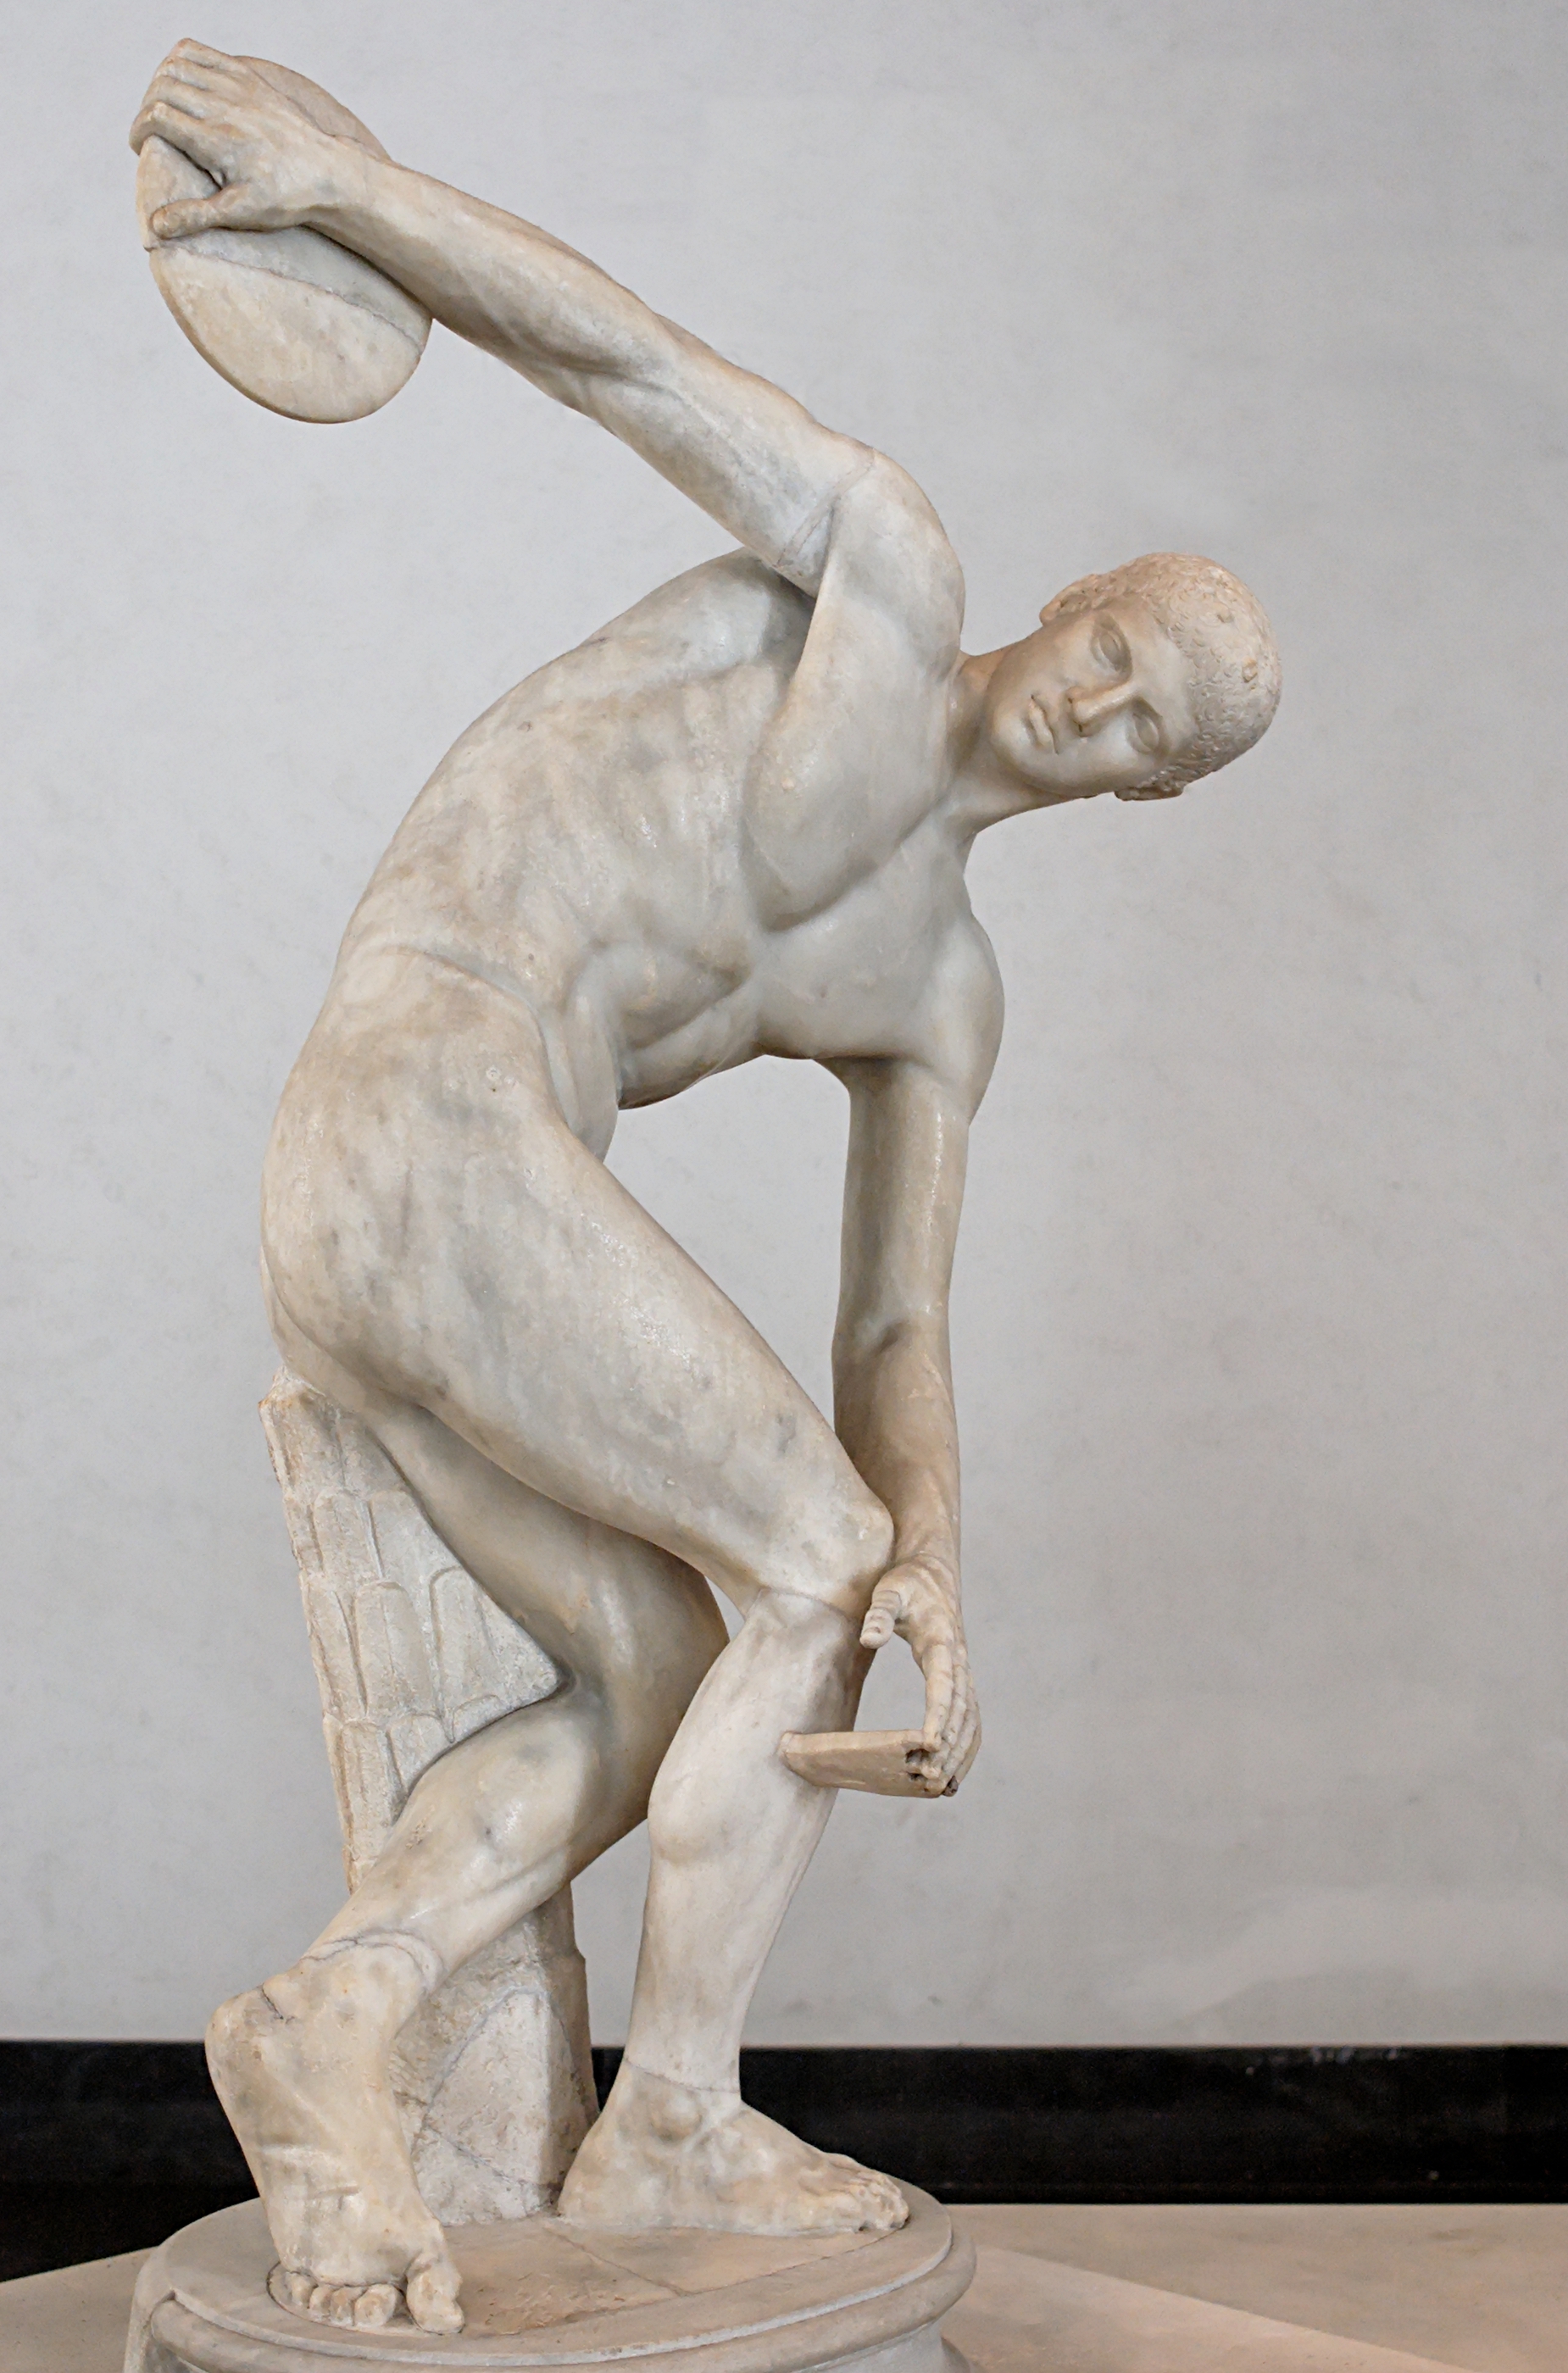 Olympic discus thrower